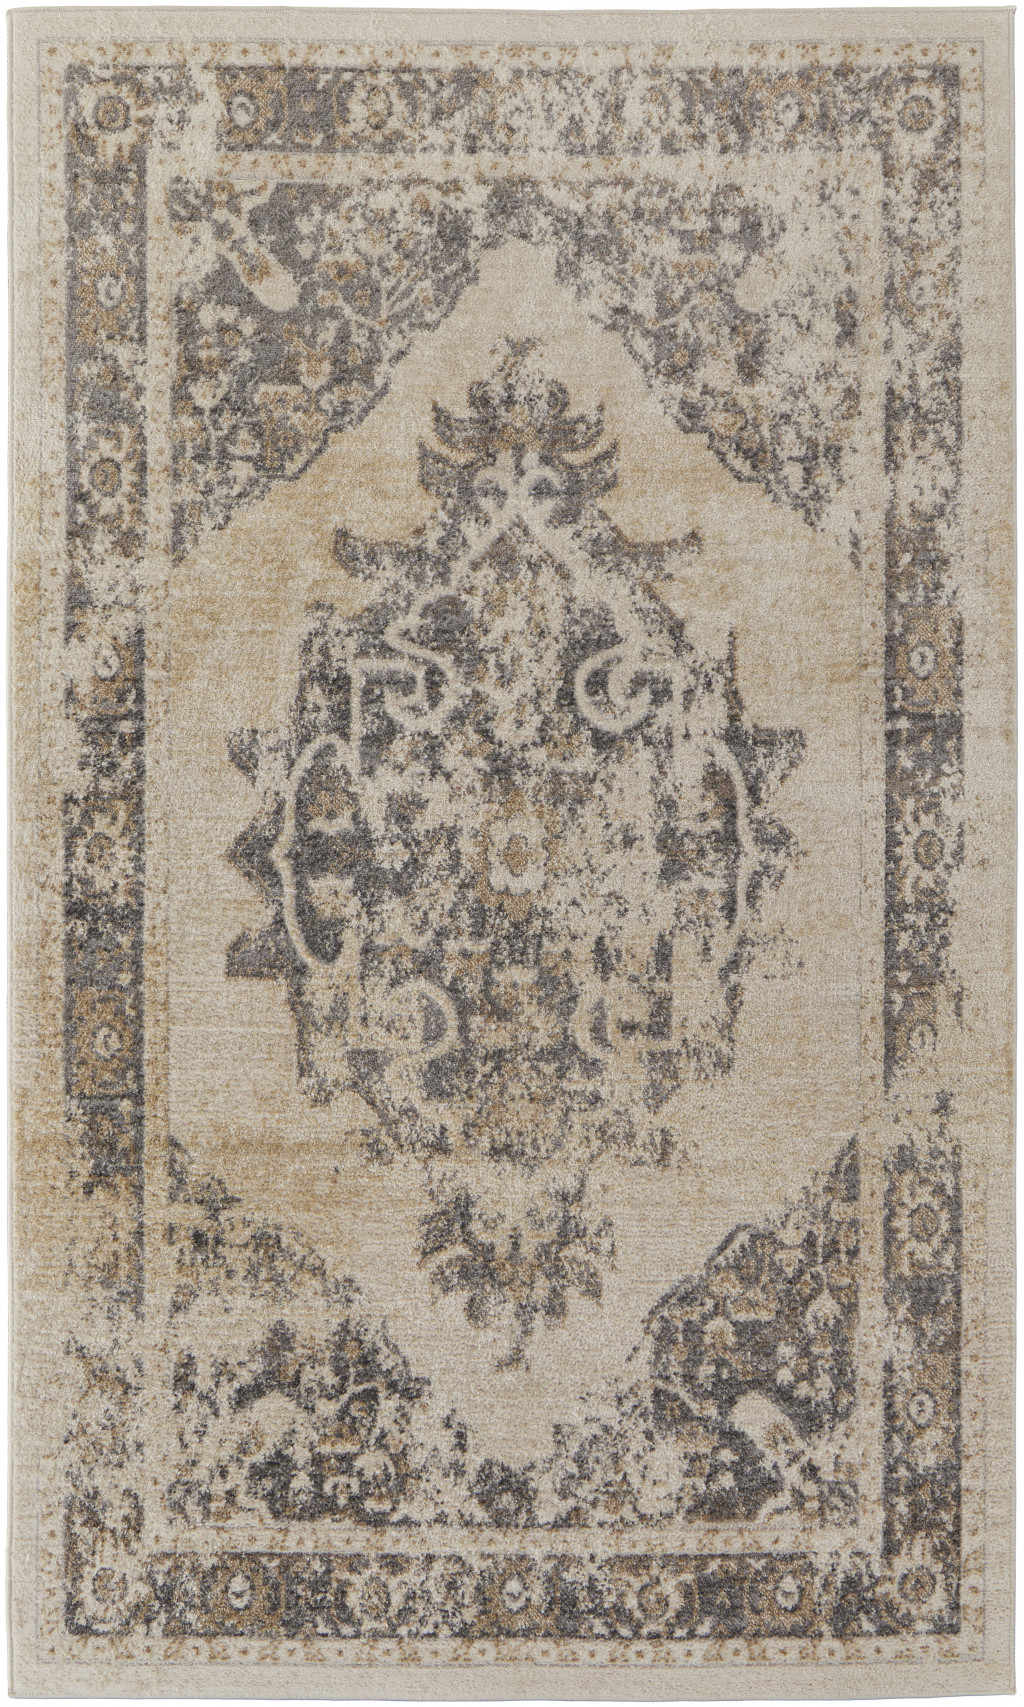 8' X 10' Ivory Gray And Brown Floral Power Loom Distressed Area Rug-513311-1